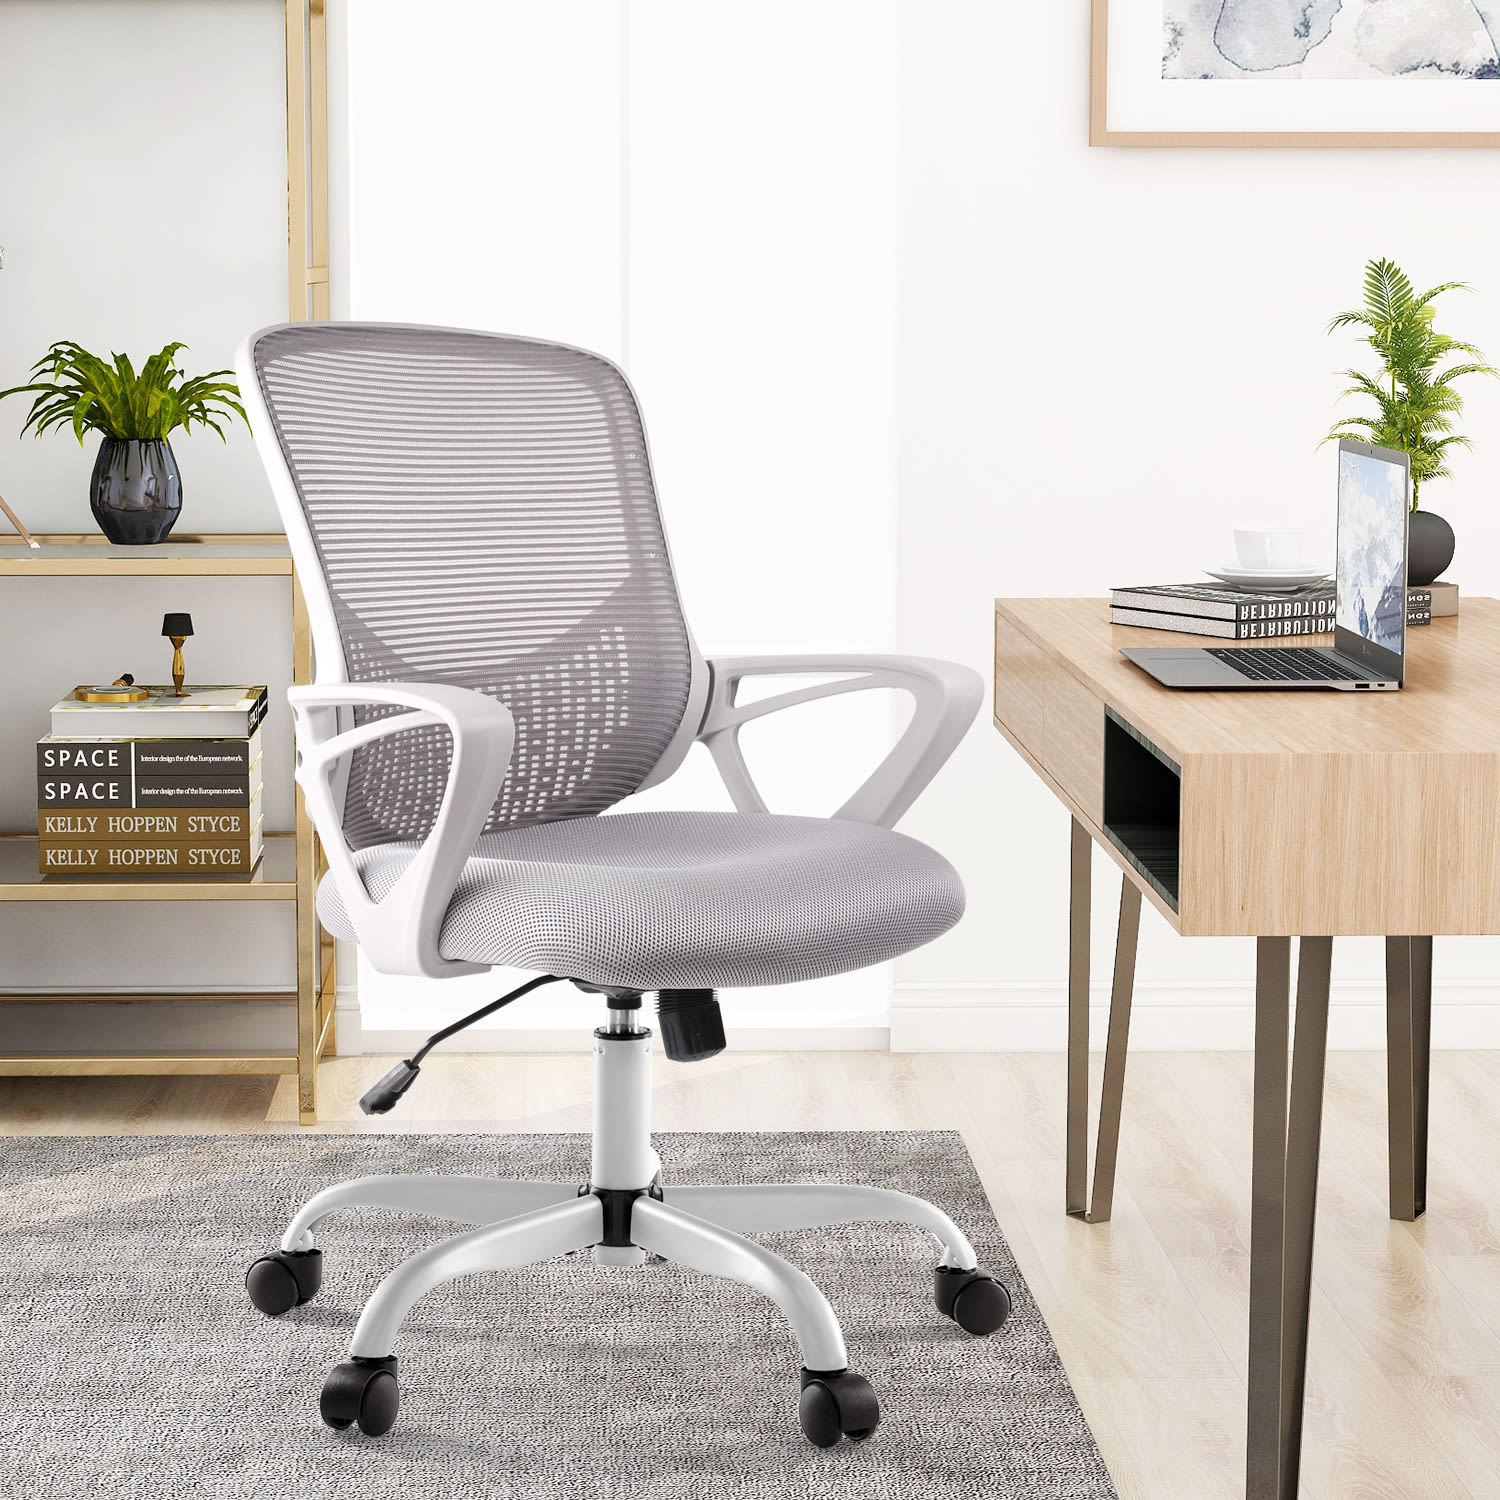 Details about   Office Desk Chair Student Seat Modern Task Adjustable Height Swivel Dorm Ideal 